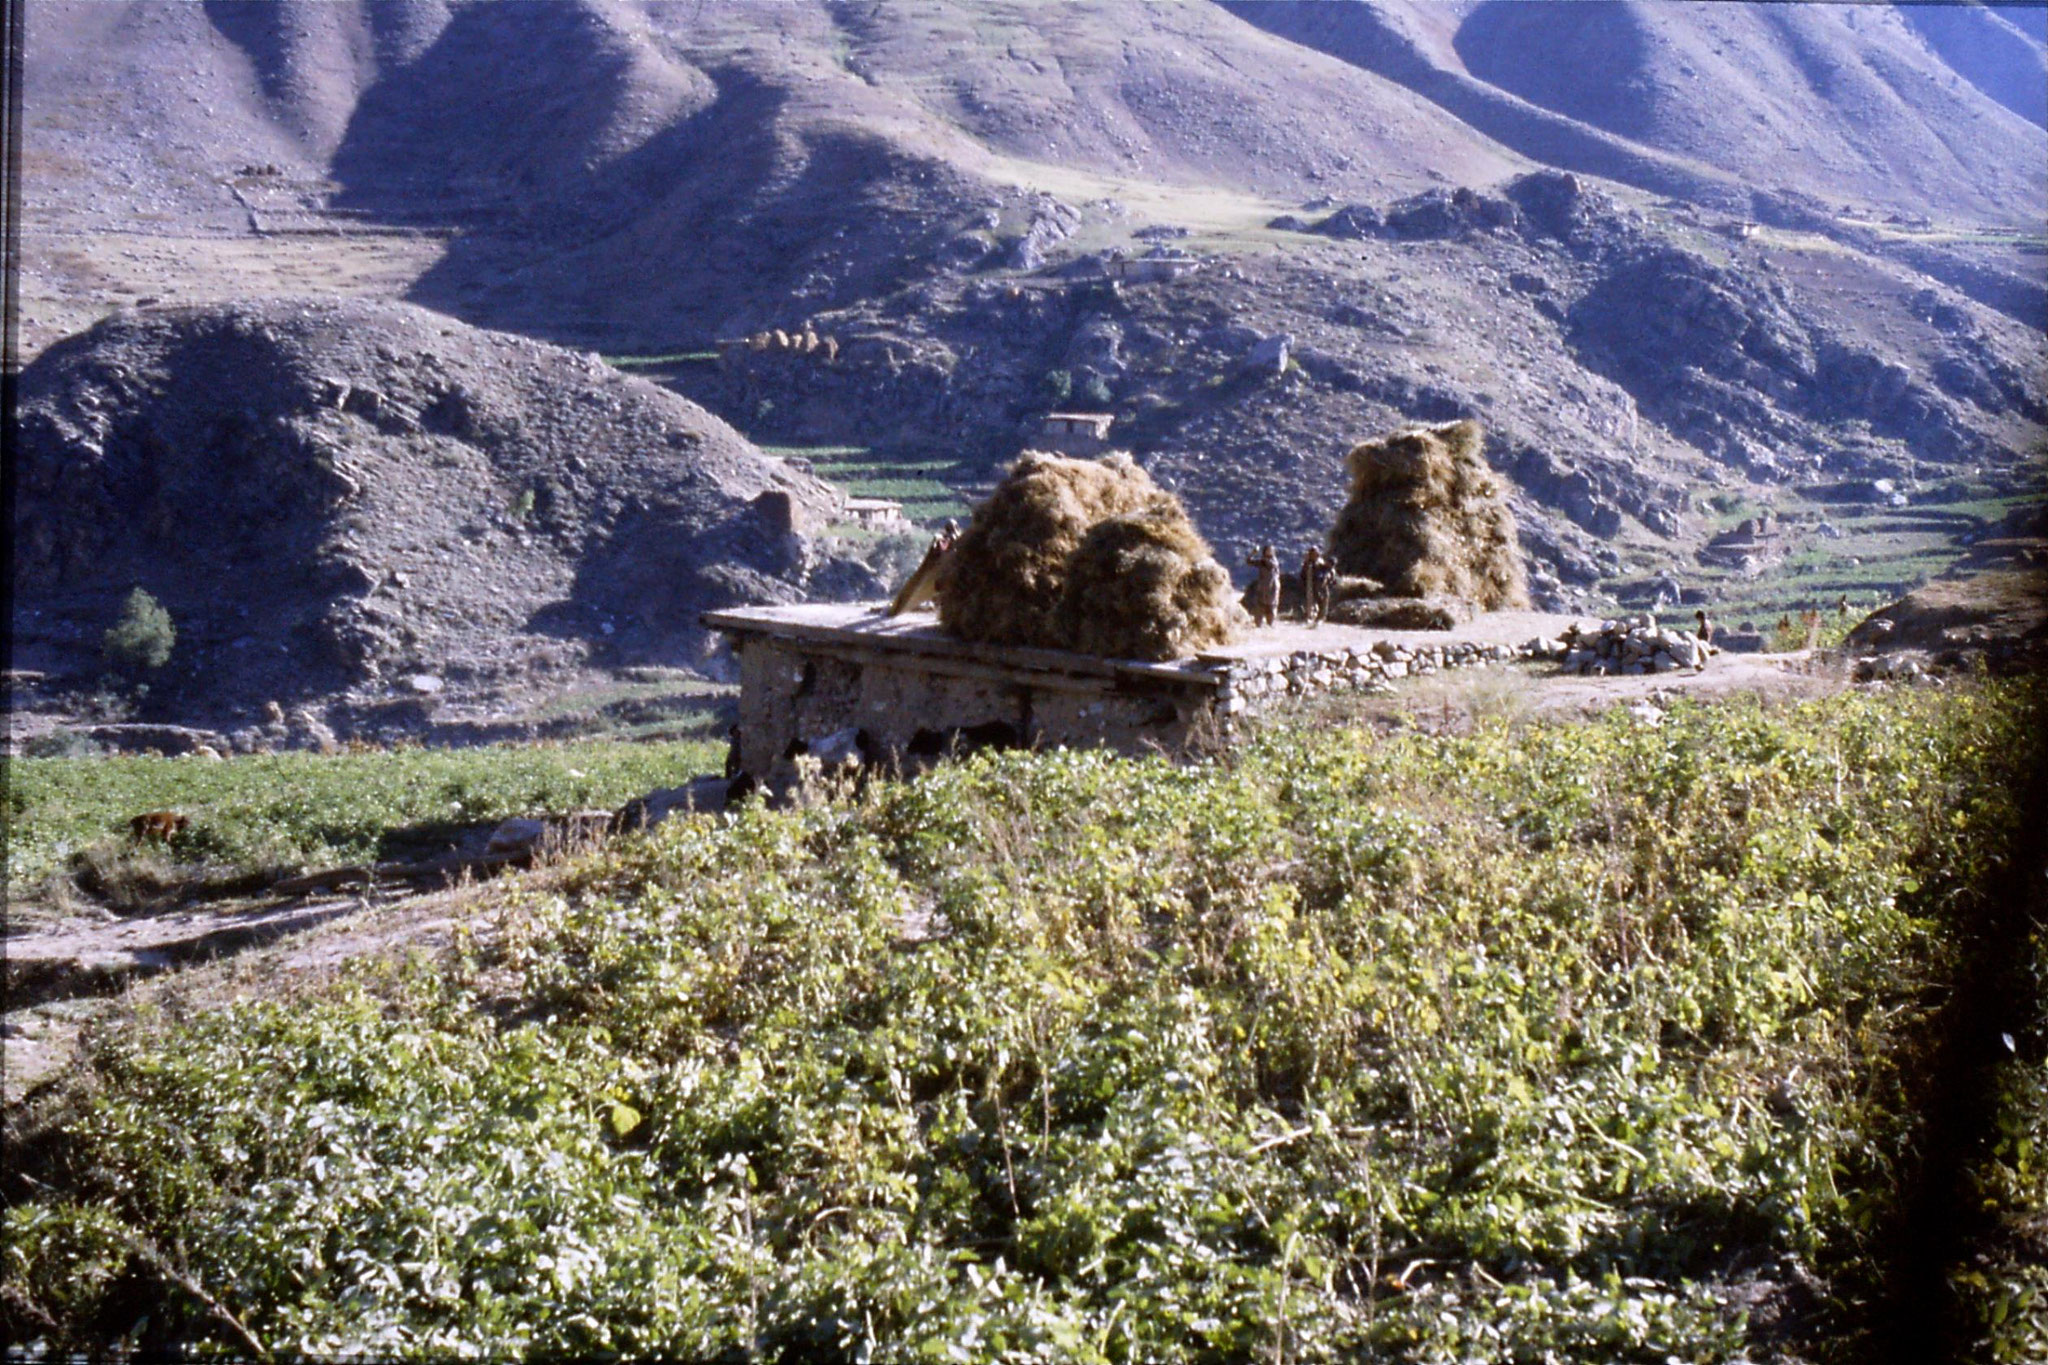 6/10/1989: 19: Kaghan Valley route to Batacundi